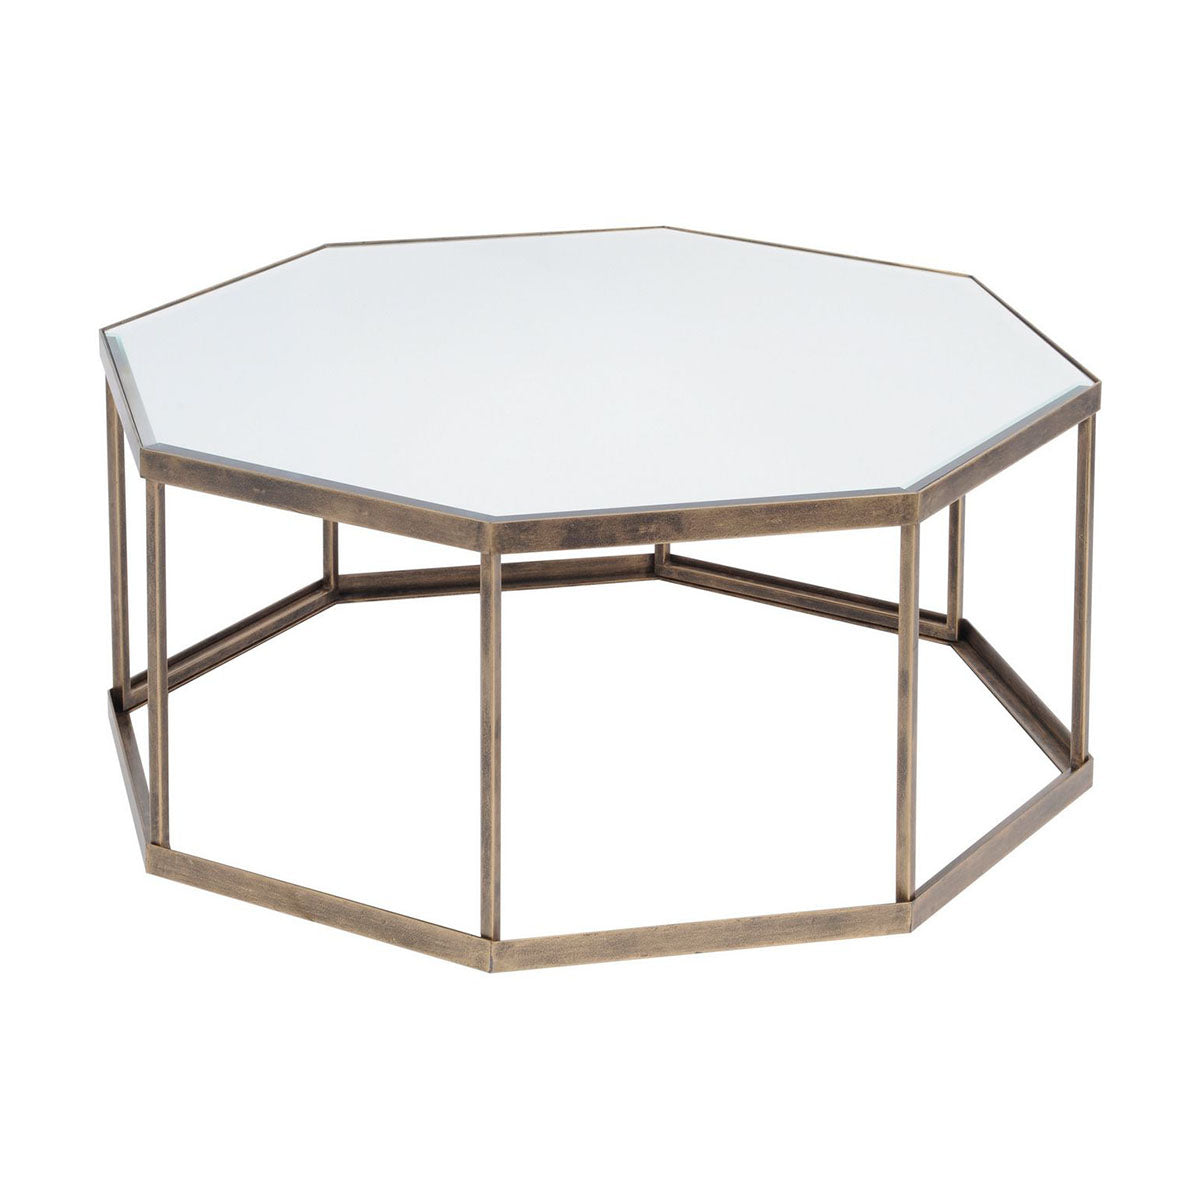 Occtaine Antique Gold Octagonal Coffee Table